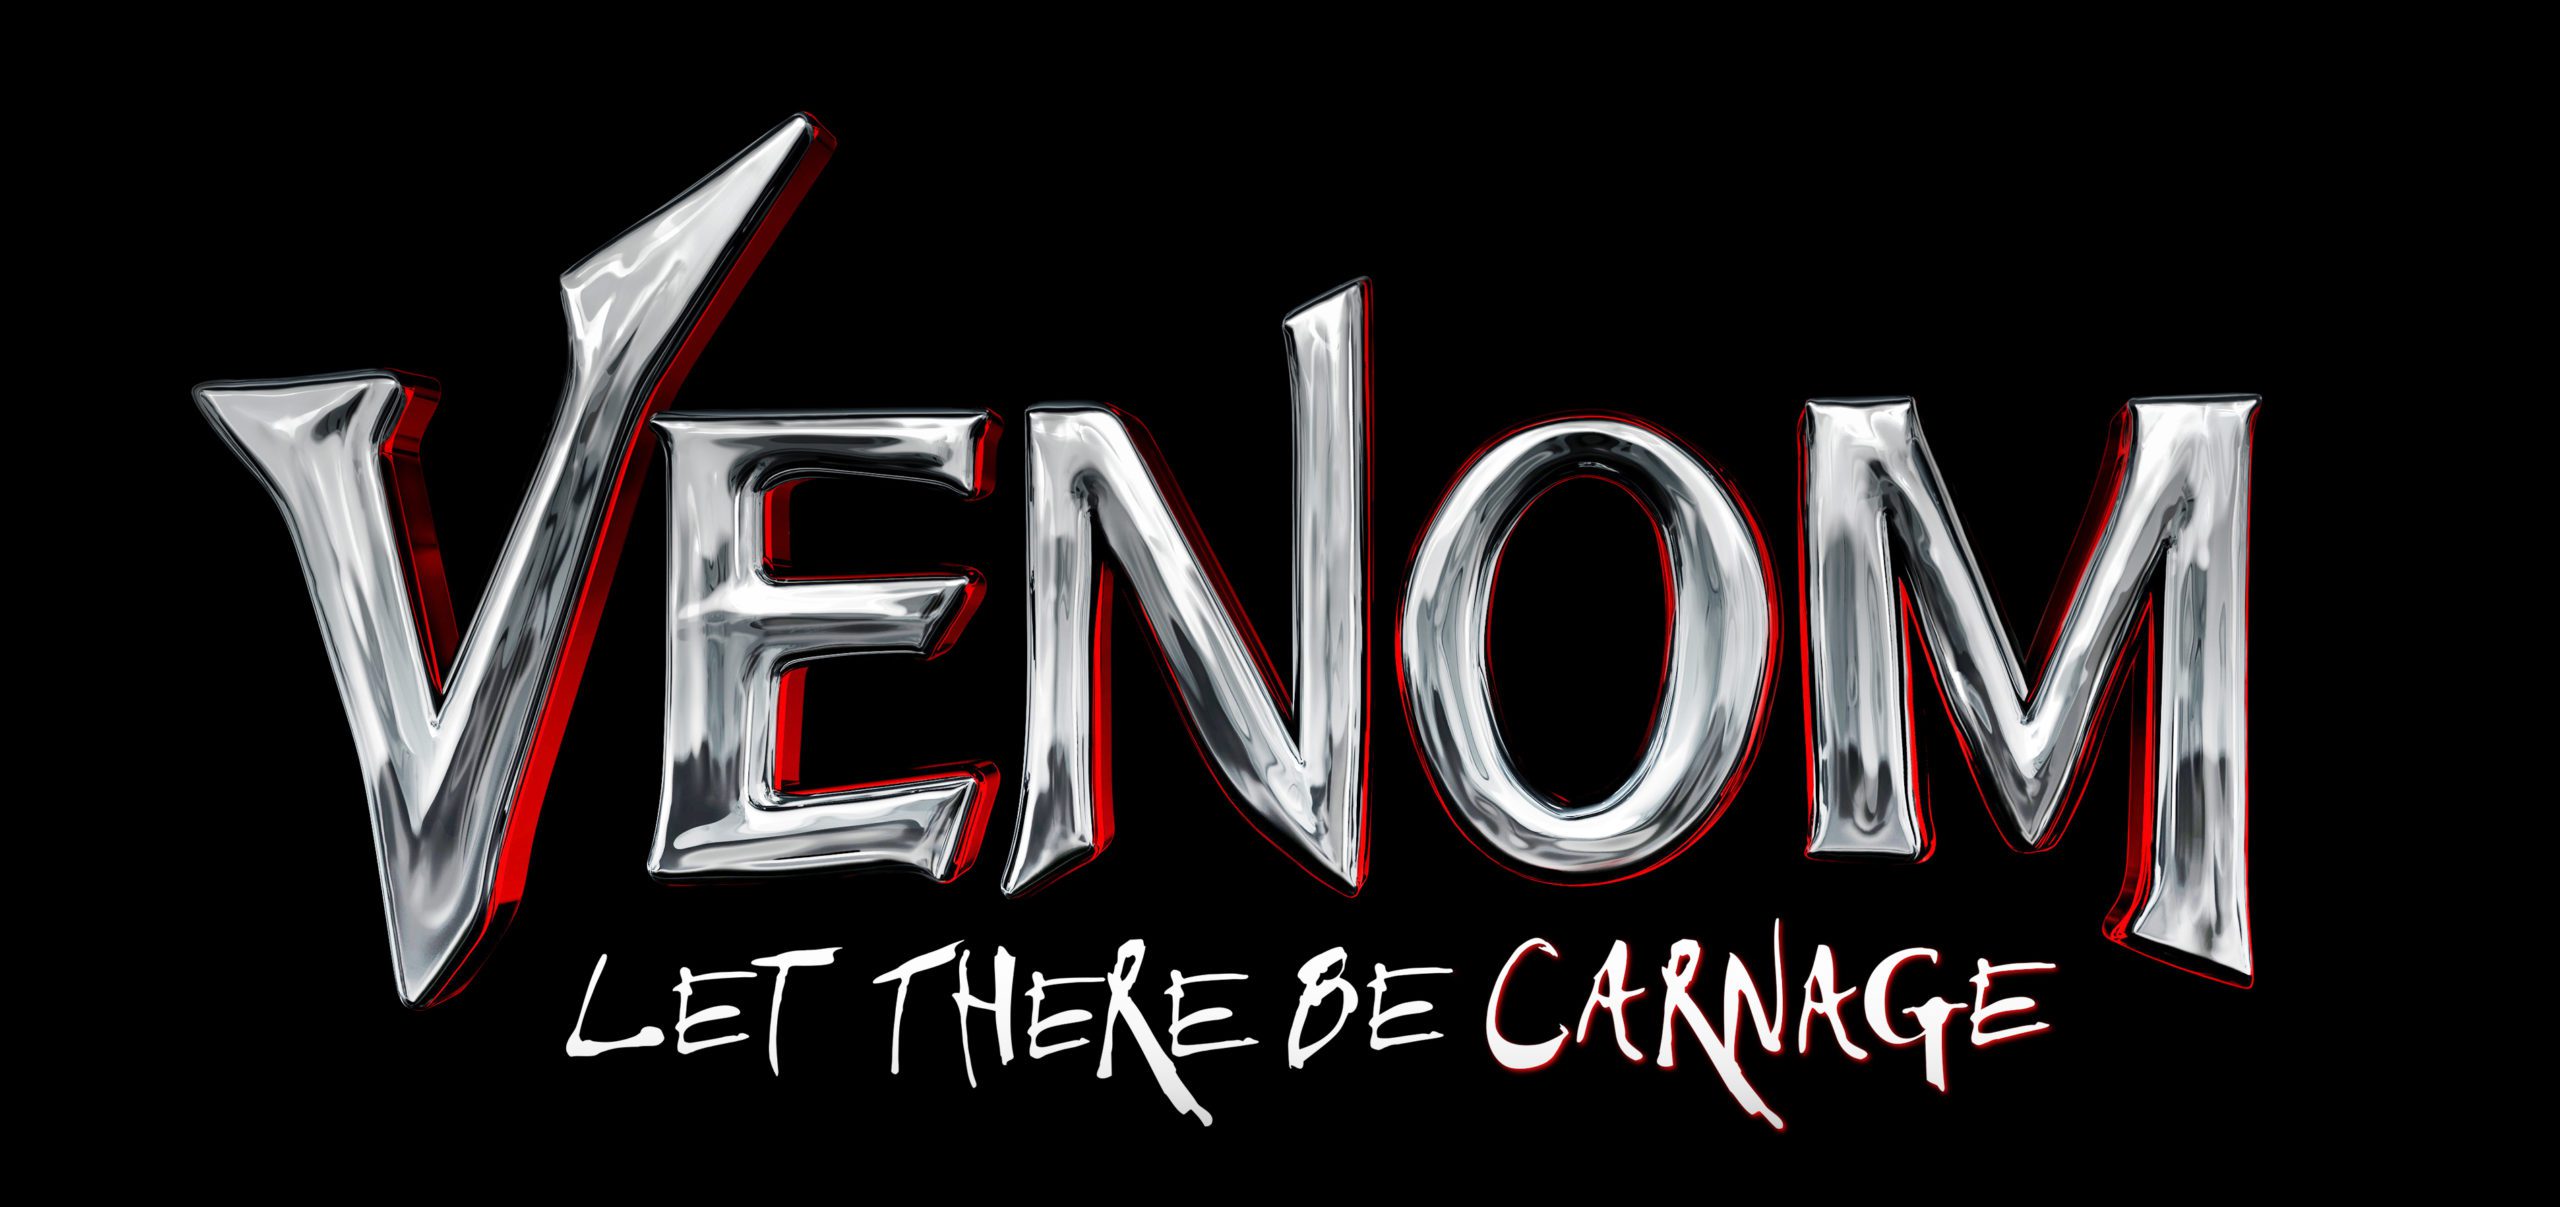 Venom Let There Be Carnage Teaserplakat